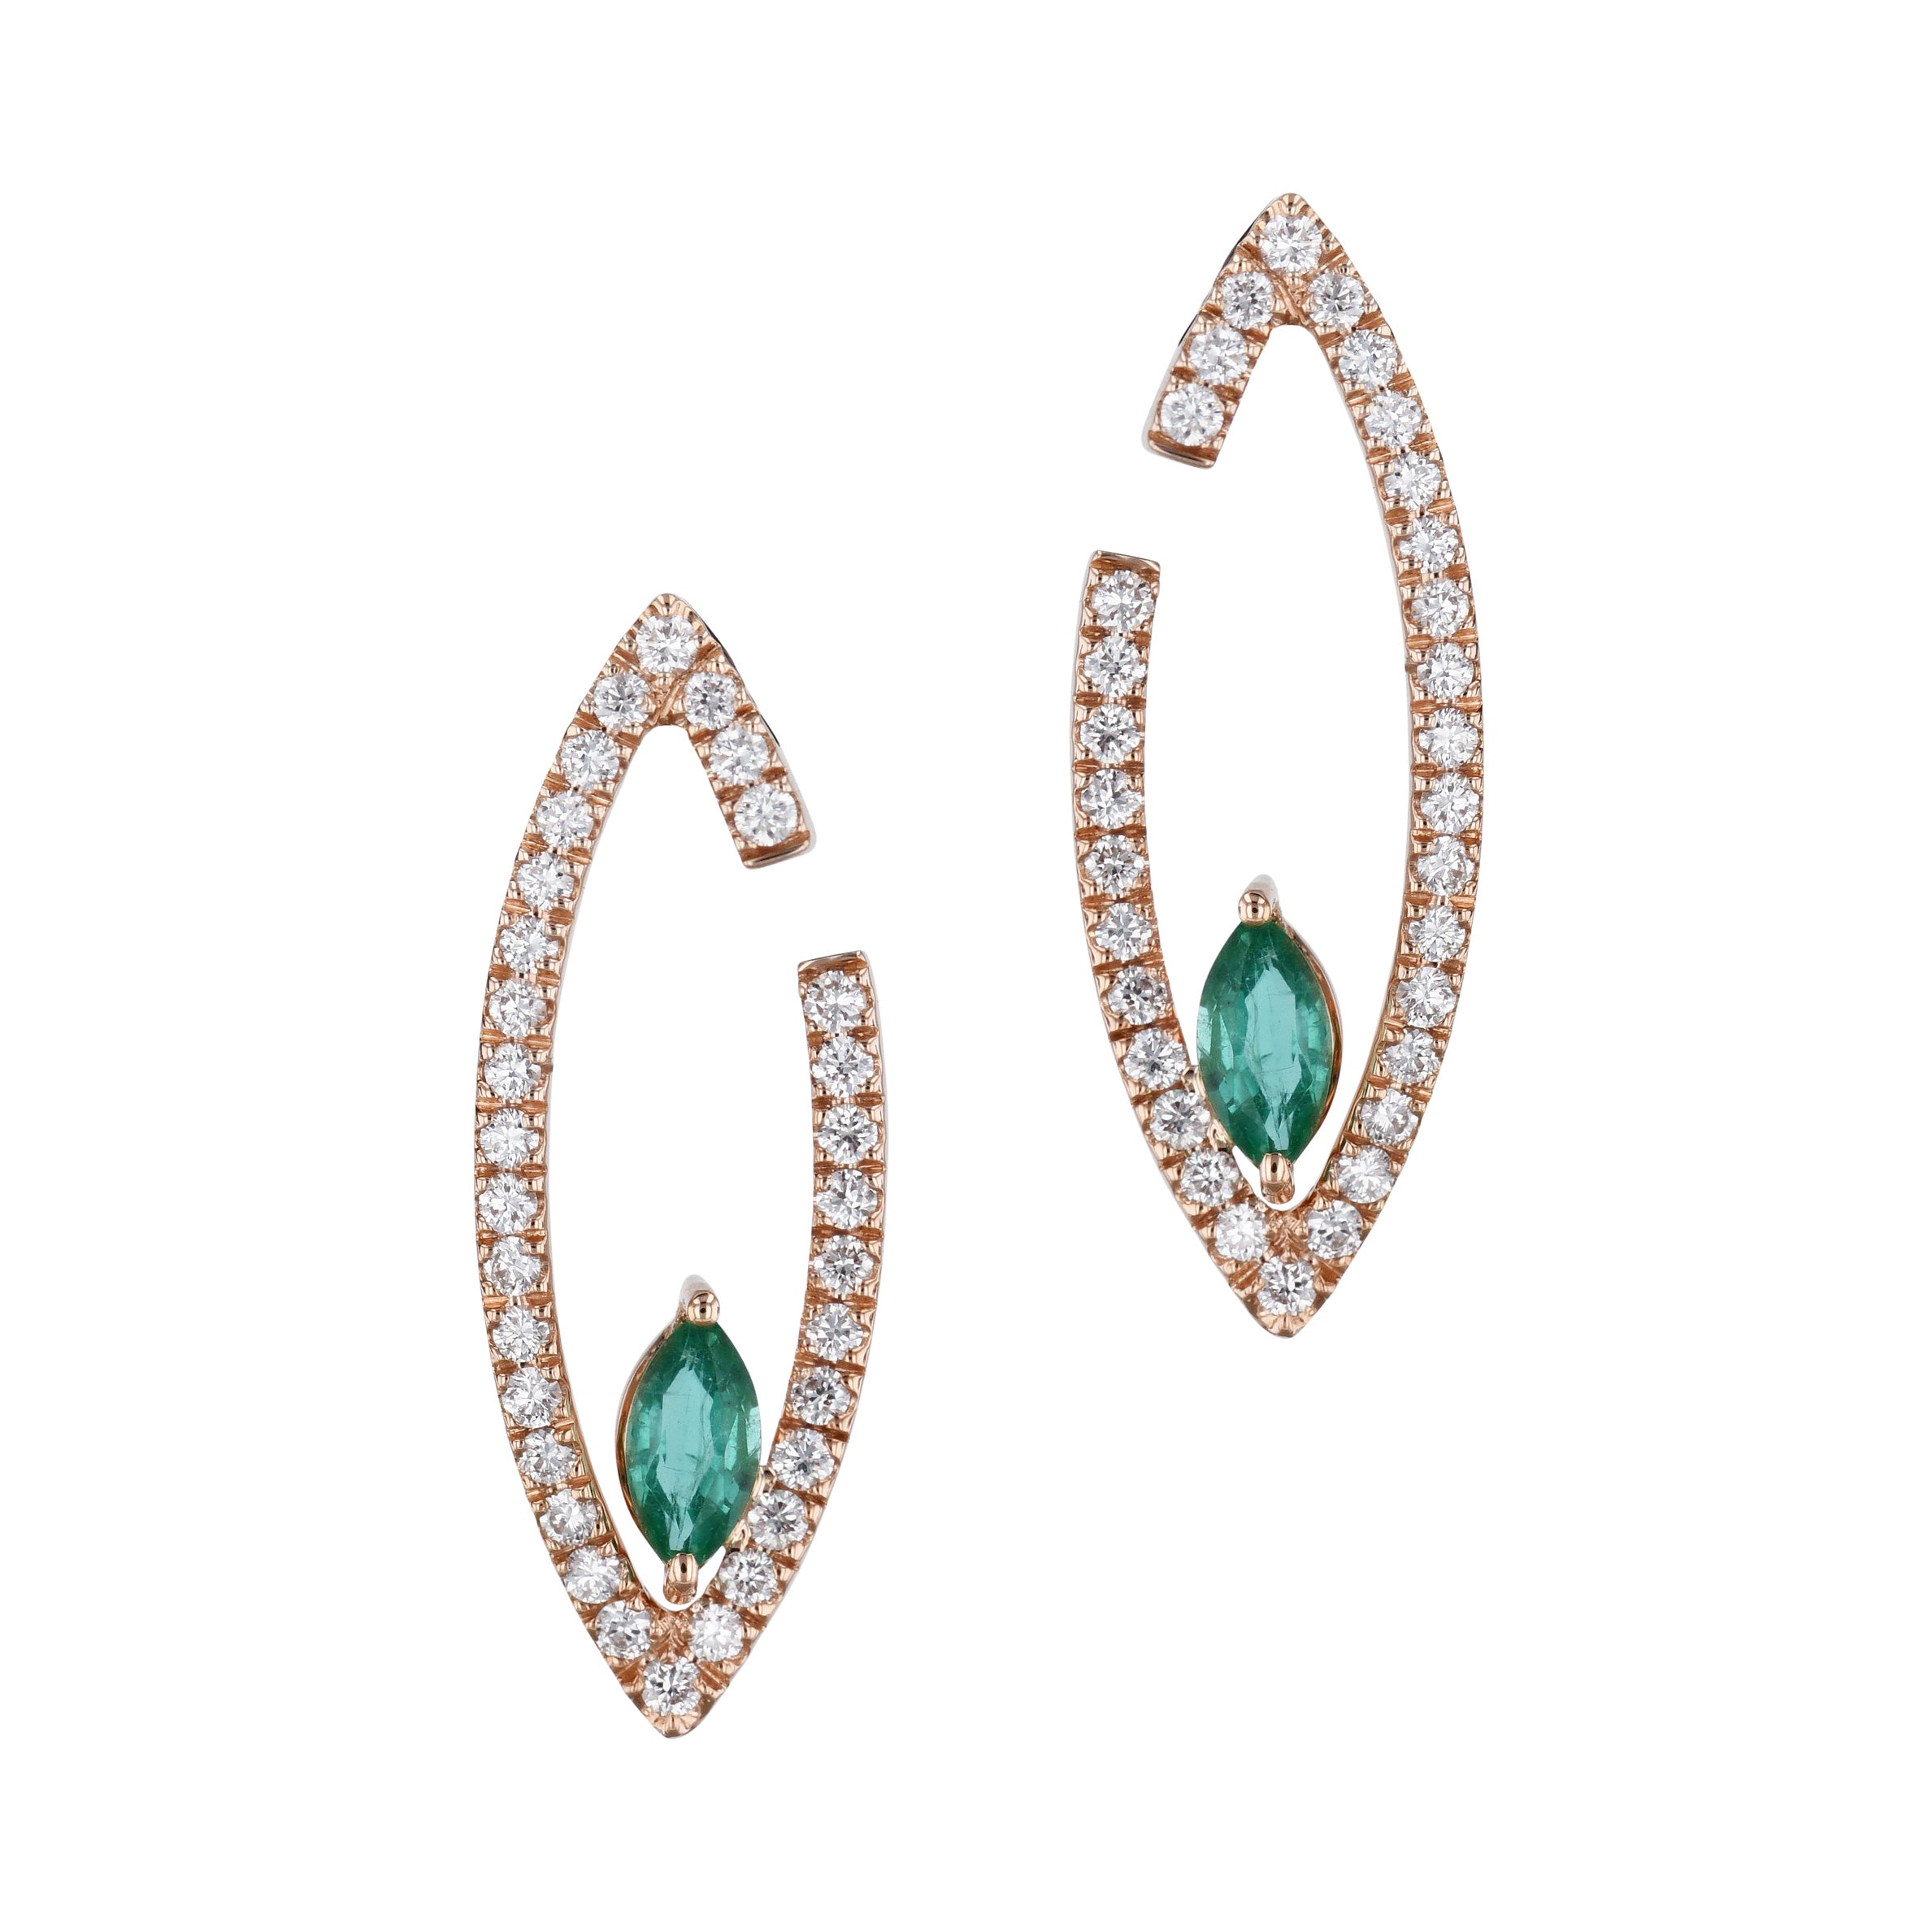 Diamond and Emerald Rose Gold Earrings Earrings Curated by H